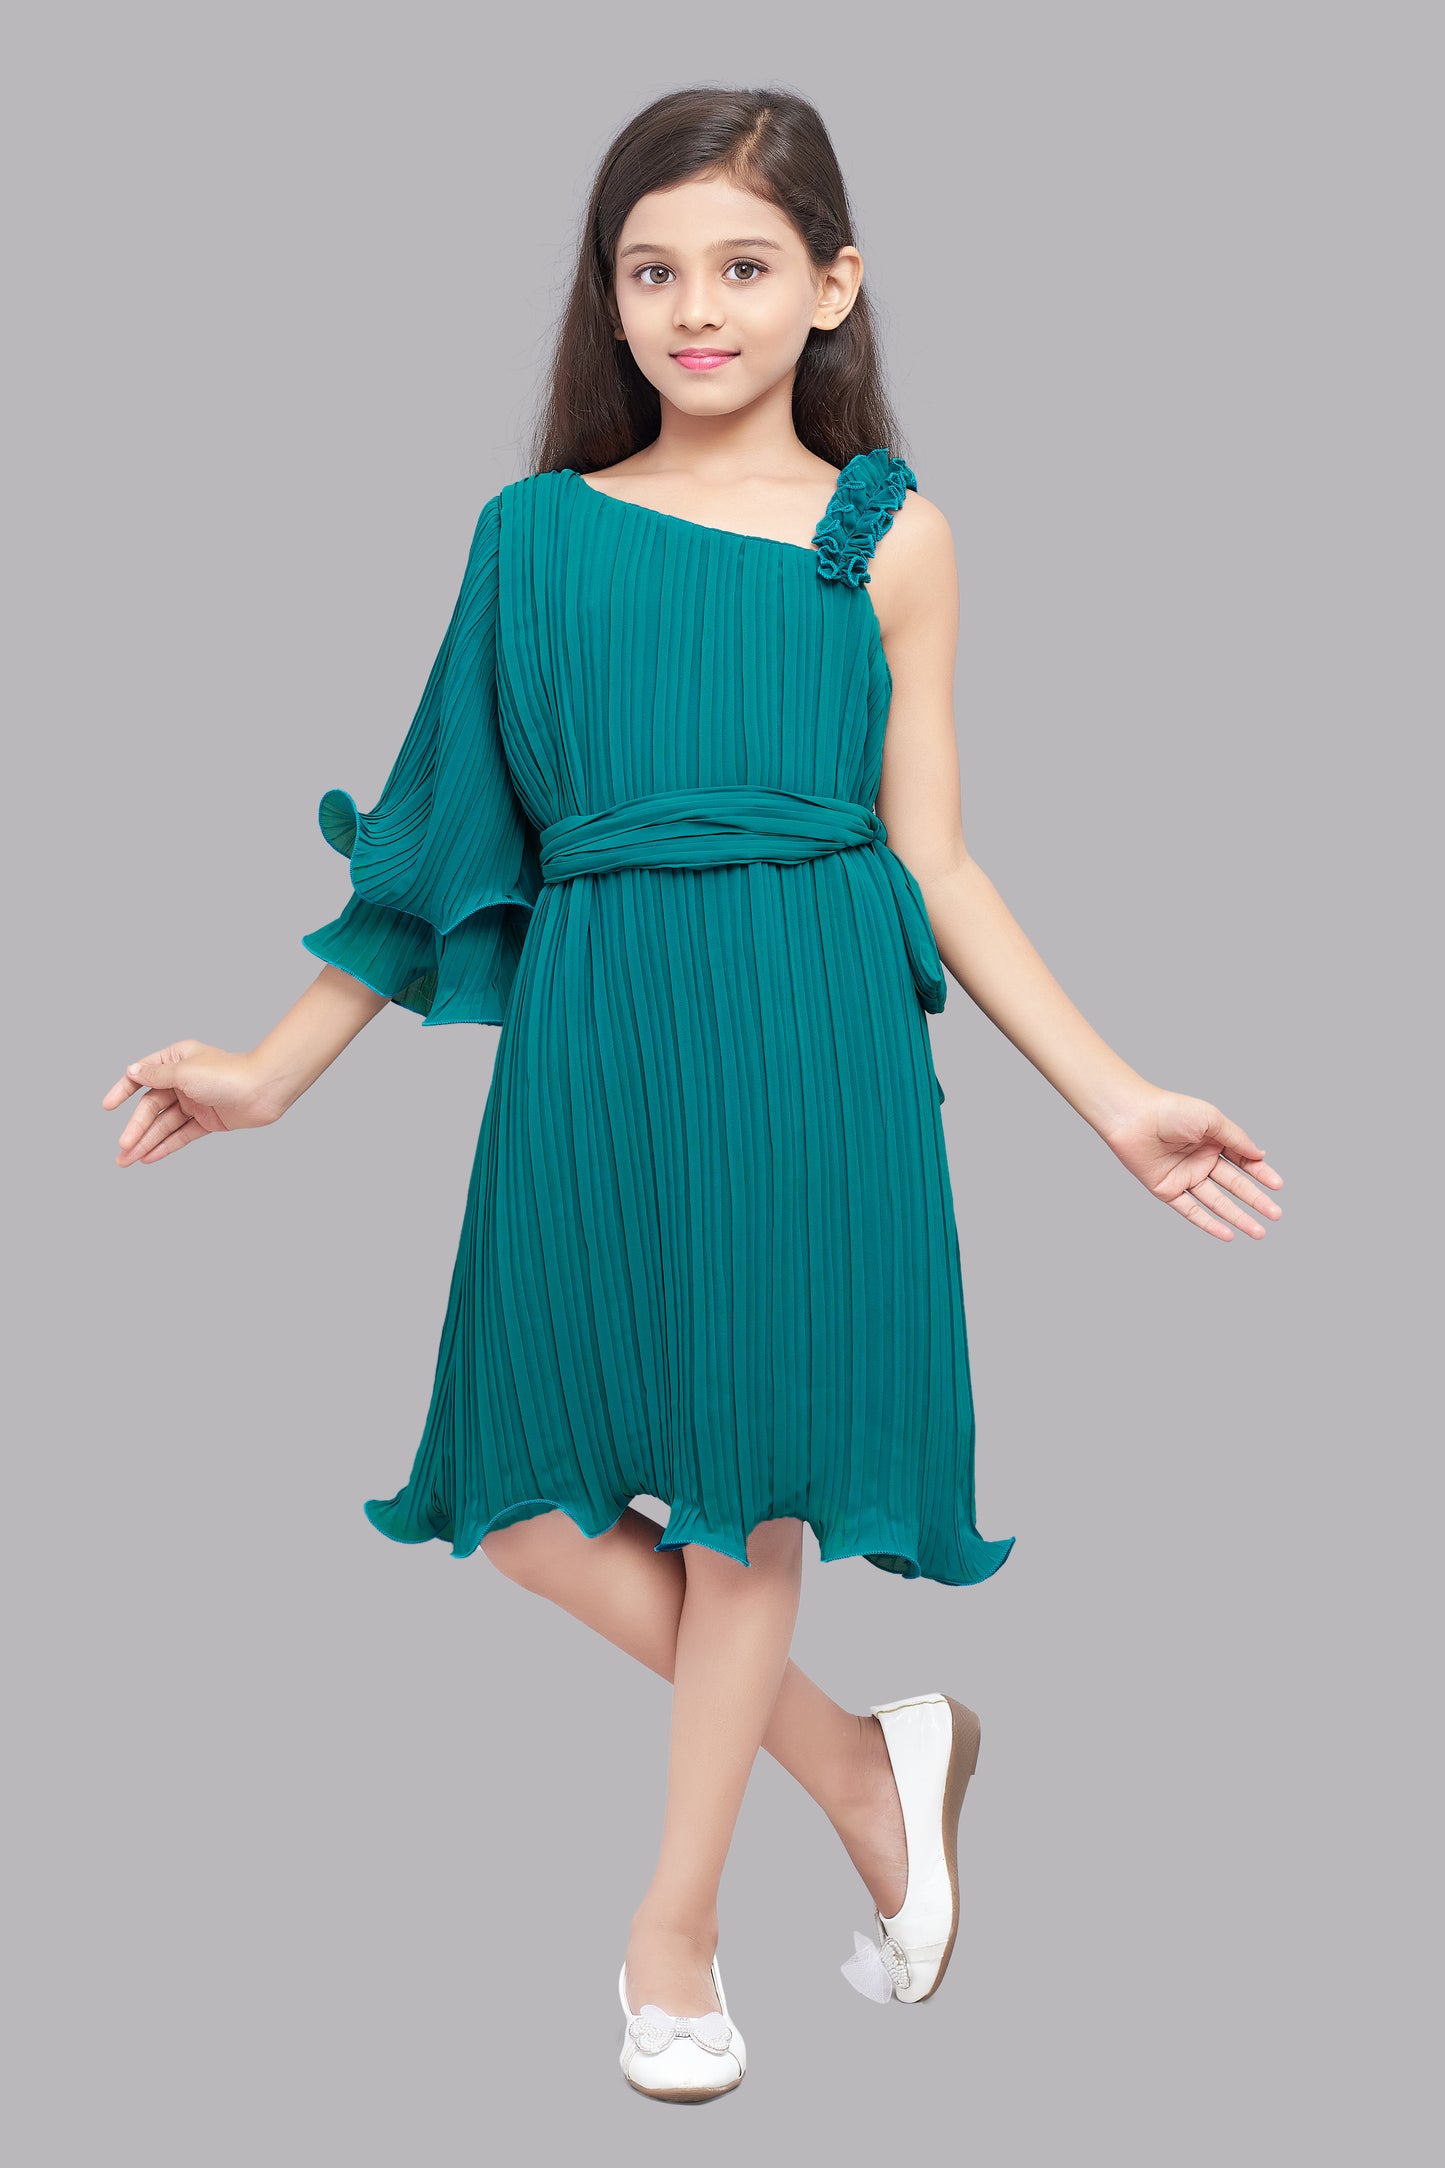 Pink Chick  Accordion Pleated One Shoulder  Dress -Teal